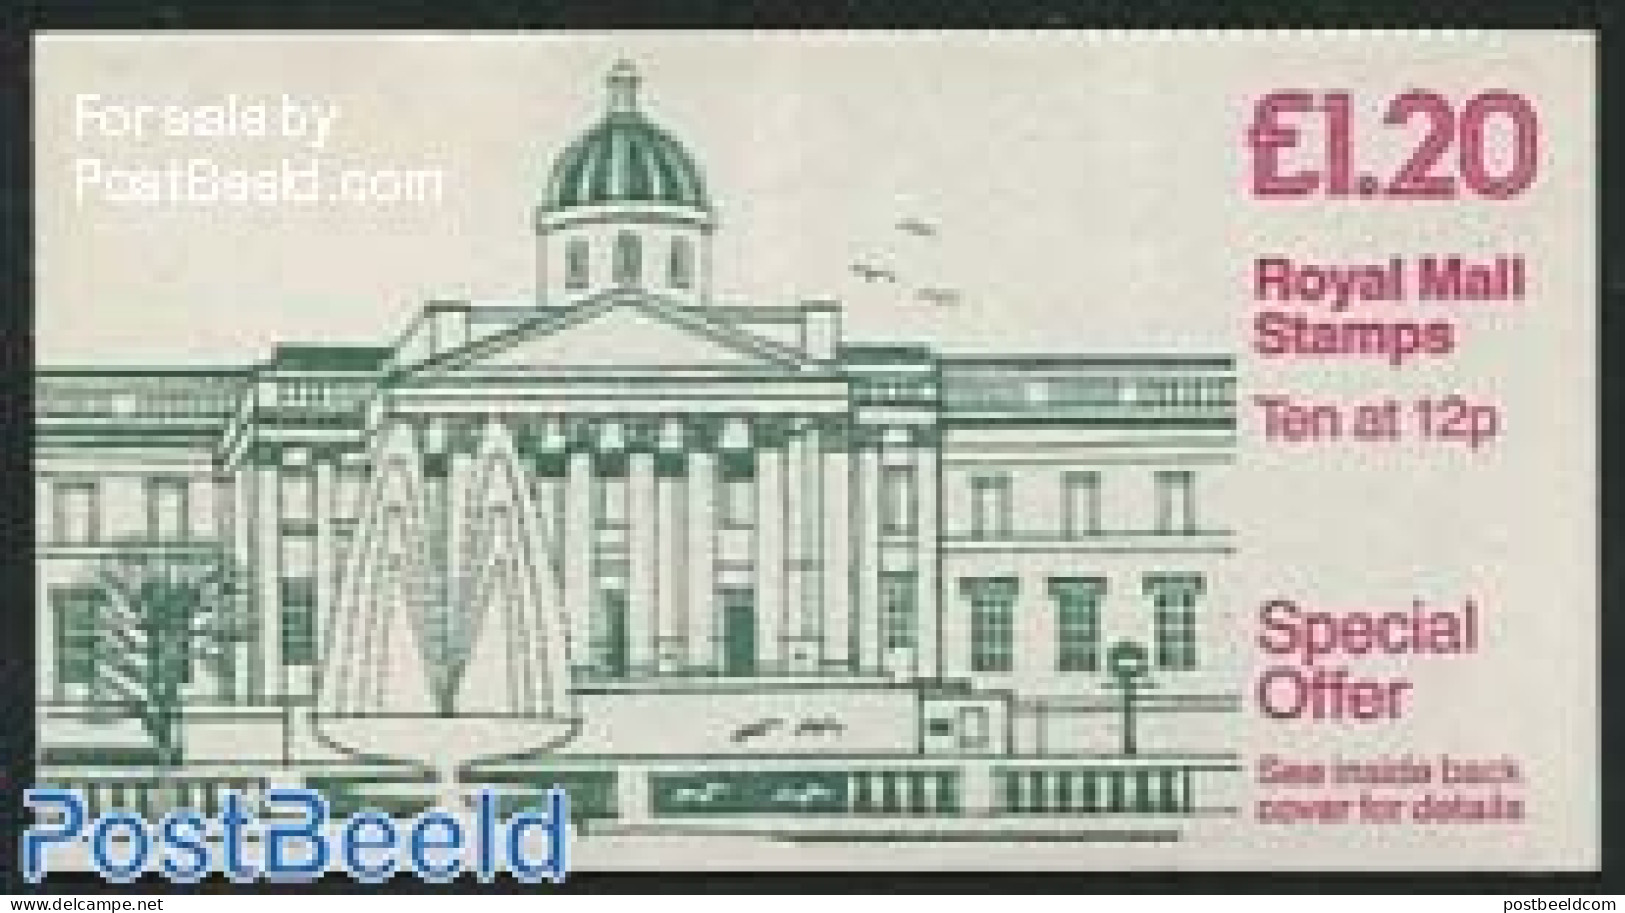 Great Britain 1986 Def. Booklet, National Gallery, Selvedge At Left, Mint NH - Ungebraucht